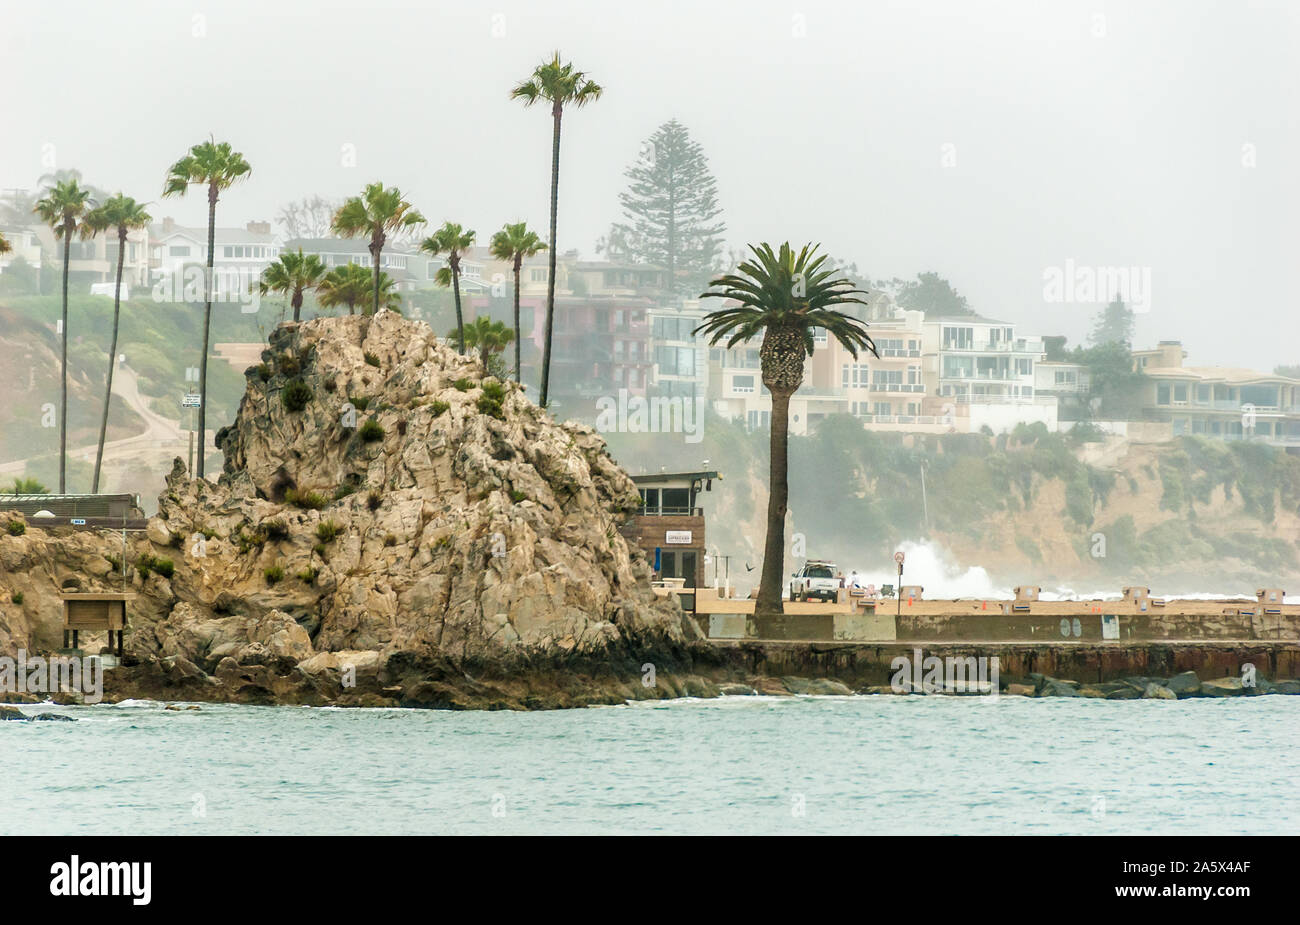 View of Corona del Mar in Newport Beach, California across the Newport Harbor Channel from The Wedge, a world famous surf spot on Balboa Island. (USA) Stock Photo